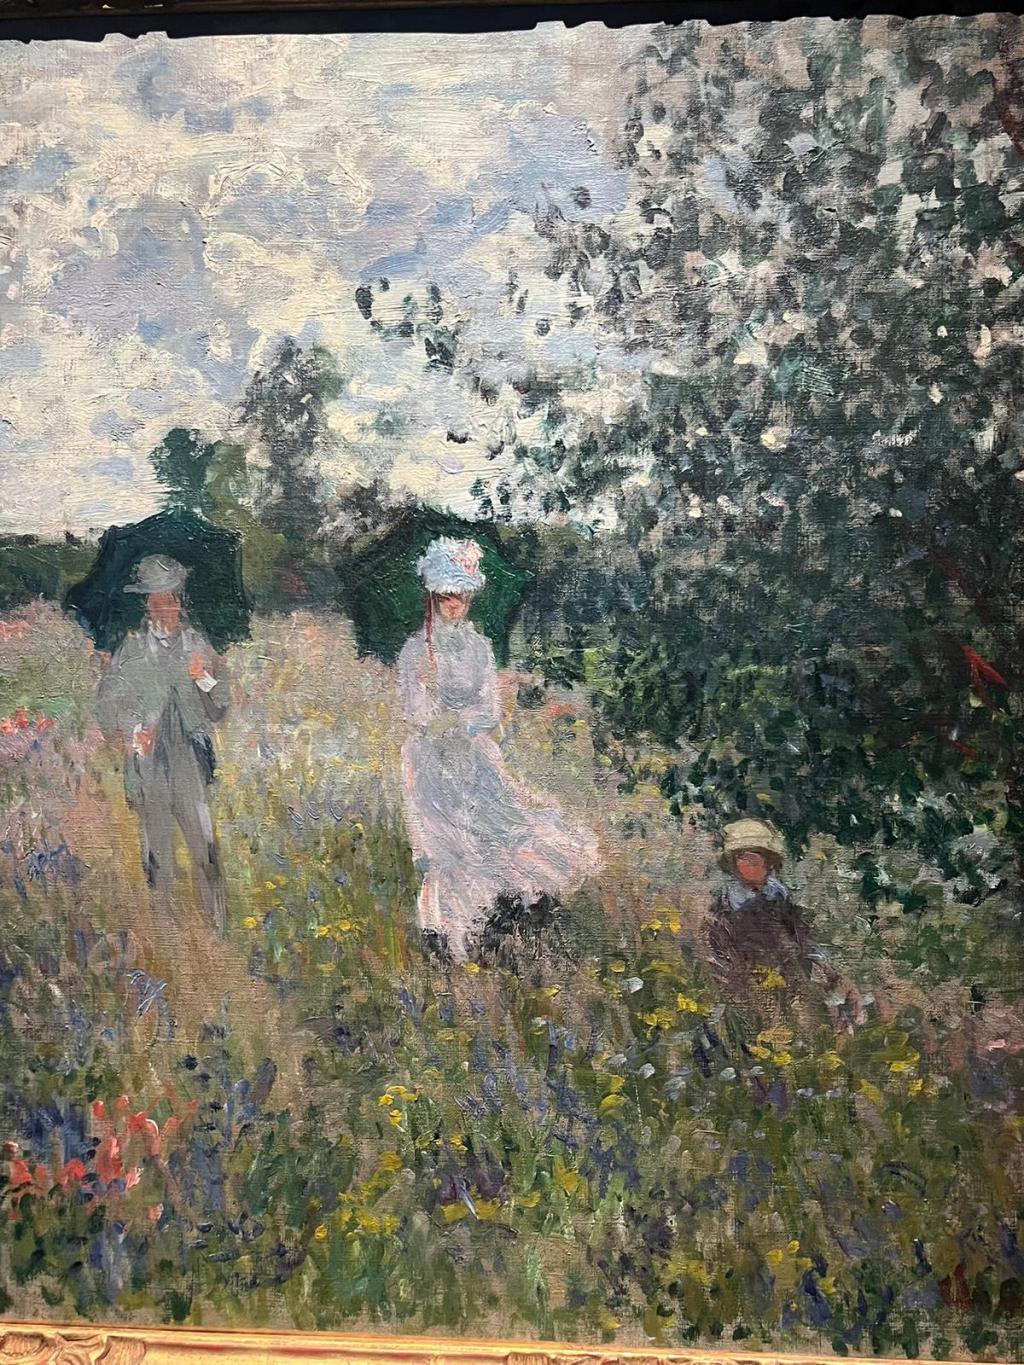 Monet. Masterpieces from the Musée Marmottan Monet, CentroCentro, Madrid (21.09 .2023 – 25.02.2024)